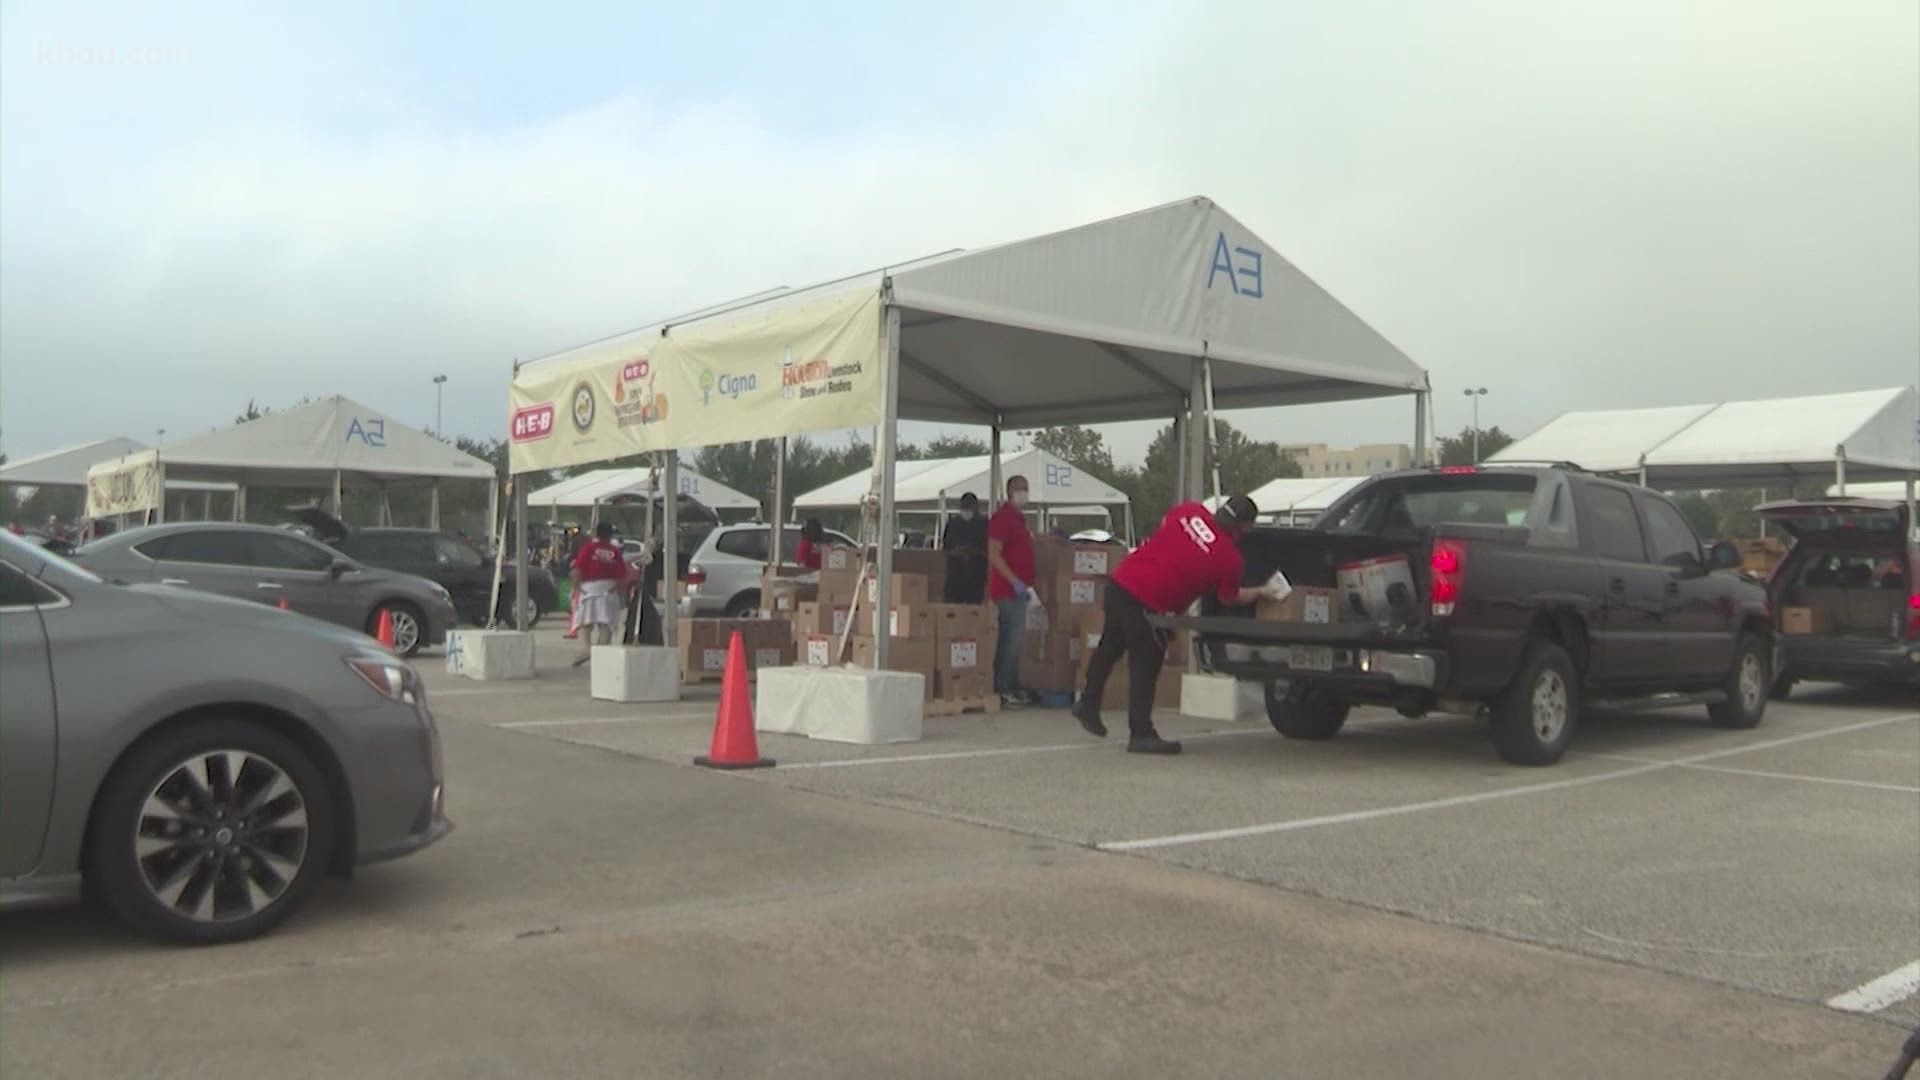 The Houston Food Bank is seeing long lines and fewer volunteers as they work to distribute more than 800,000 pounds of food every day.